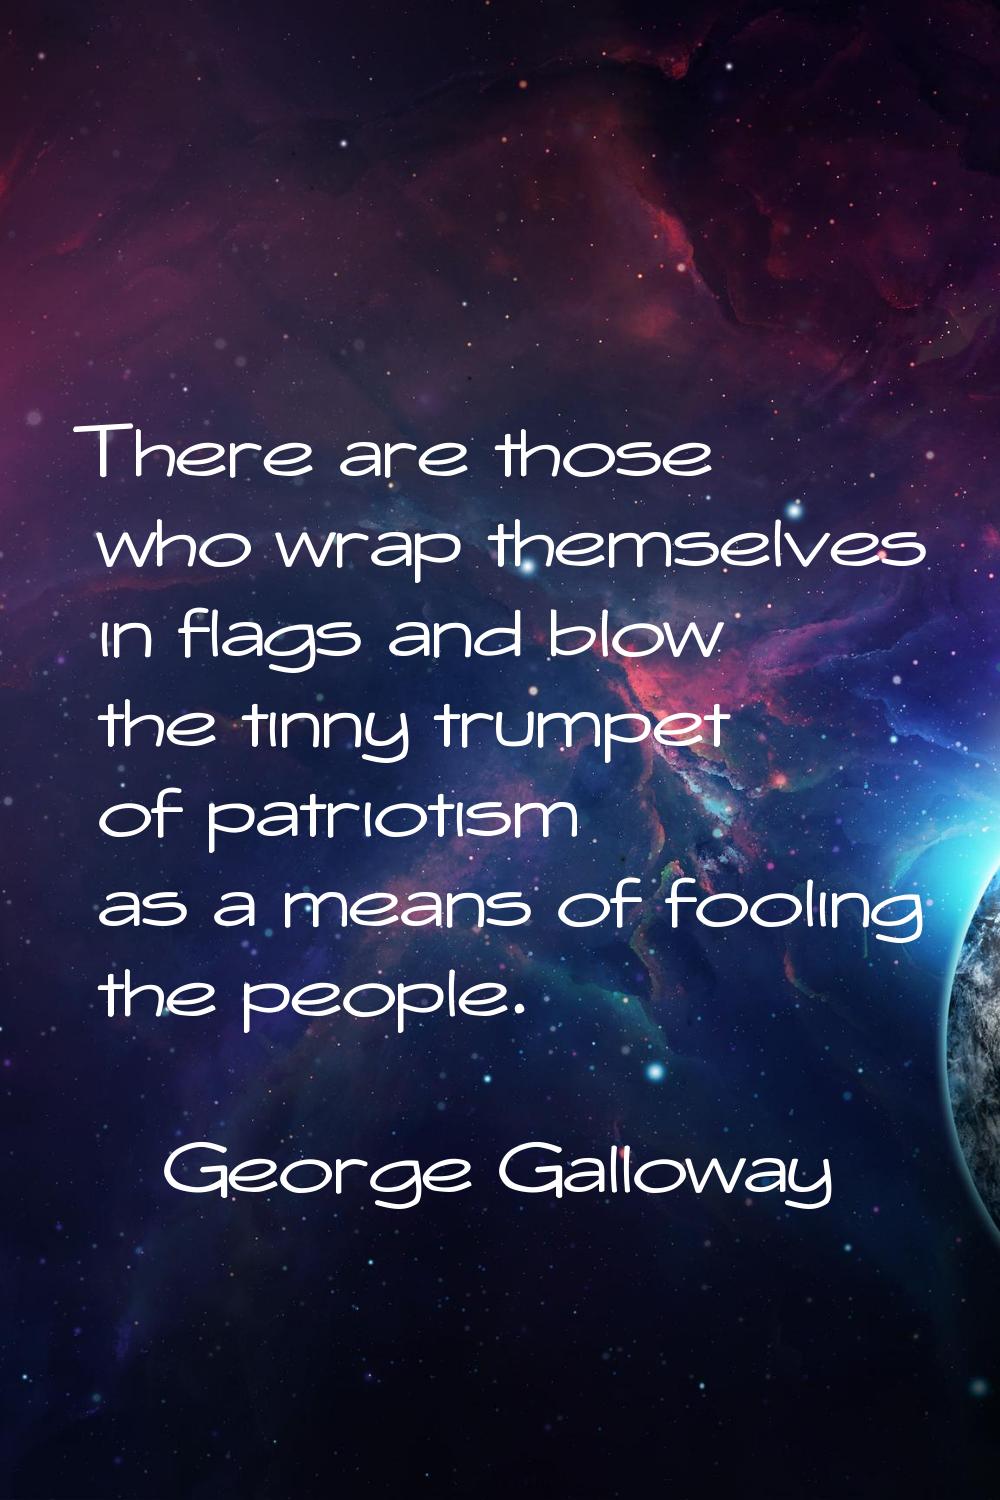 There are those who wrap themselves in flags and blow the tinny trumpet of patriotism as a means of